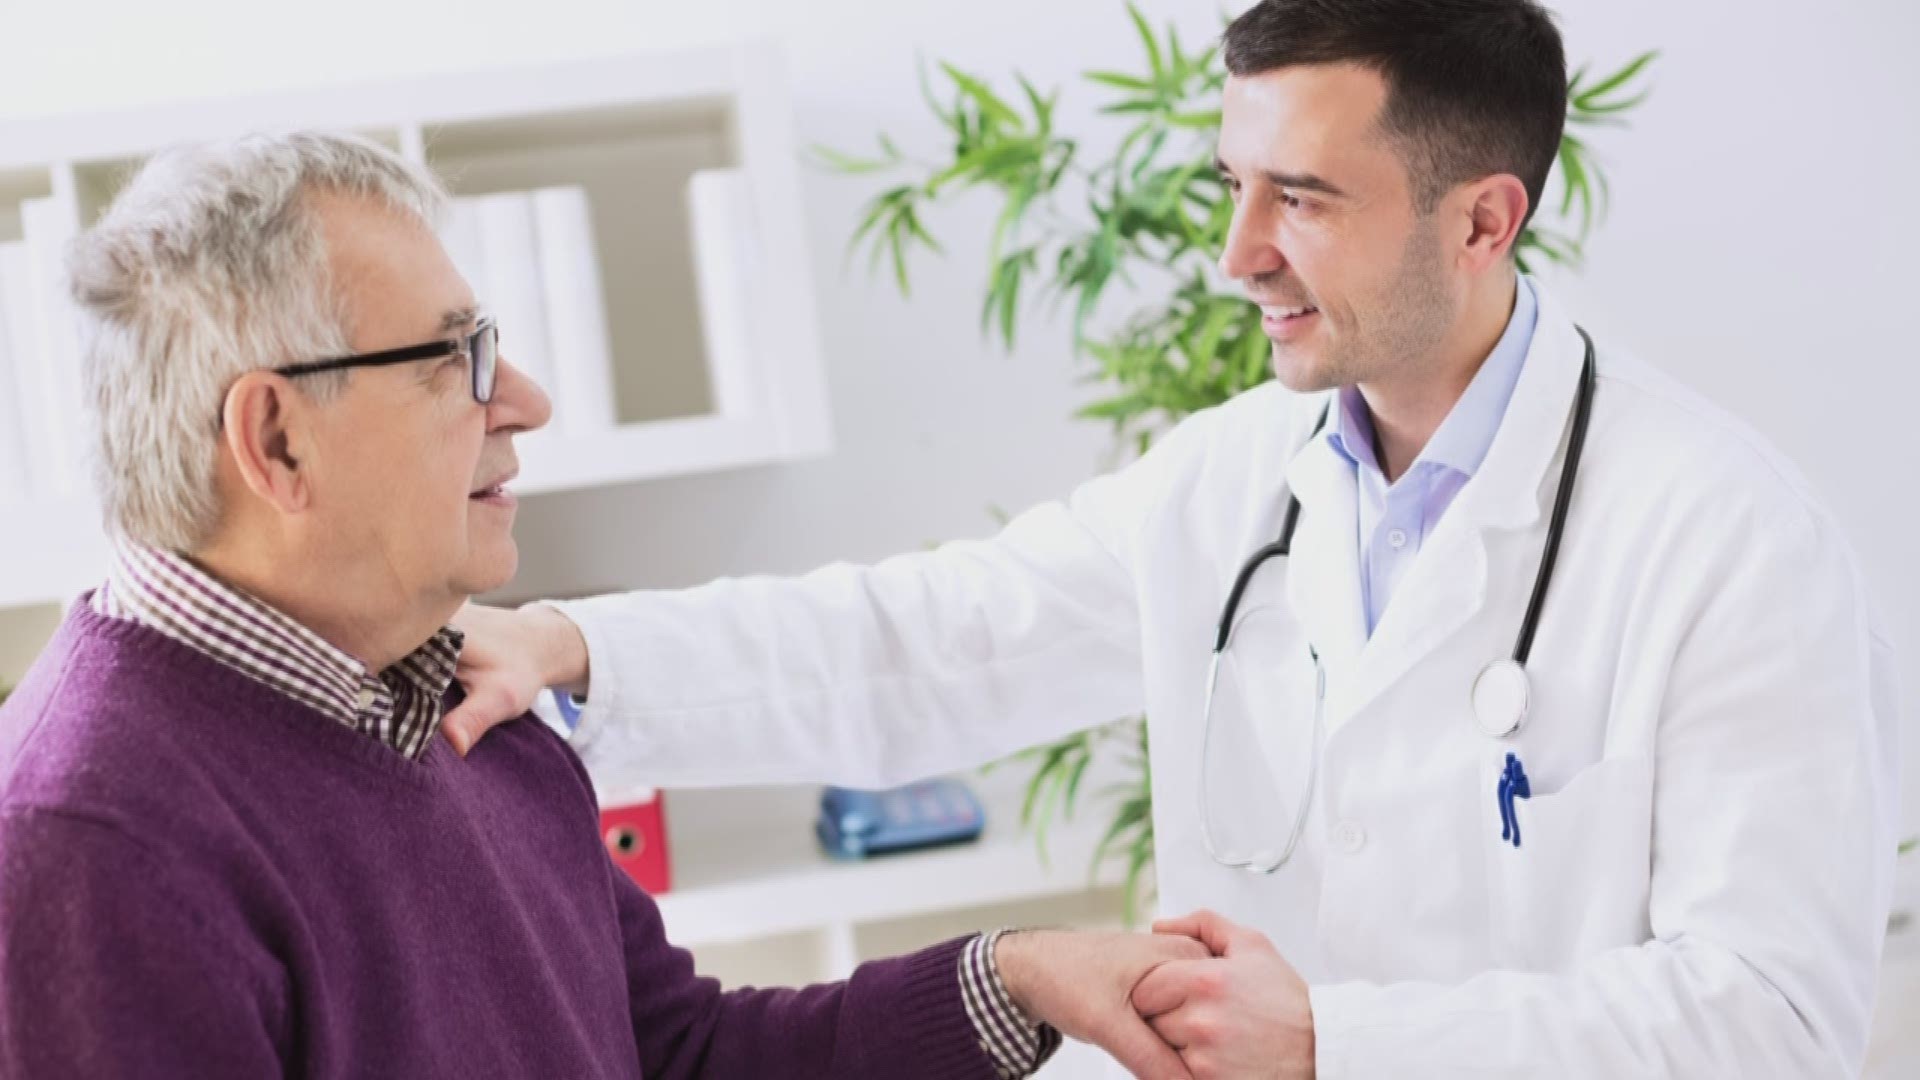 Dr. Tom VonSternberg of HealthPartners is the Senior Medical Director of Community senior care, home care, Hospice and Care Management. He says the Medicare Annual Wellness Exam is a great opportunity for seniors to connect with their physicians. ?Ways fo